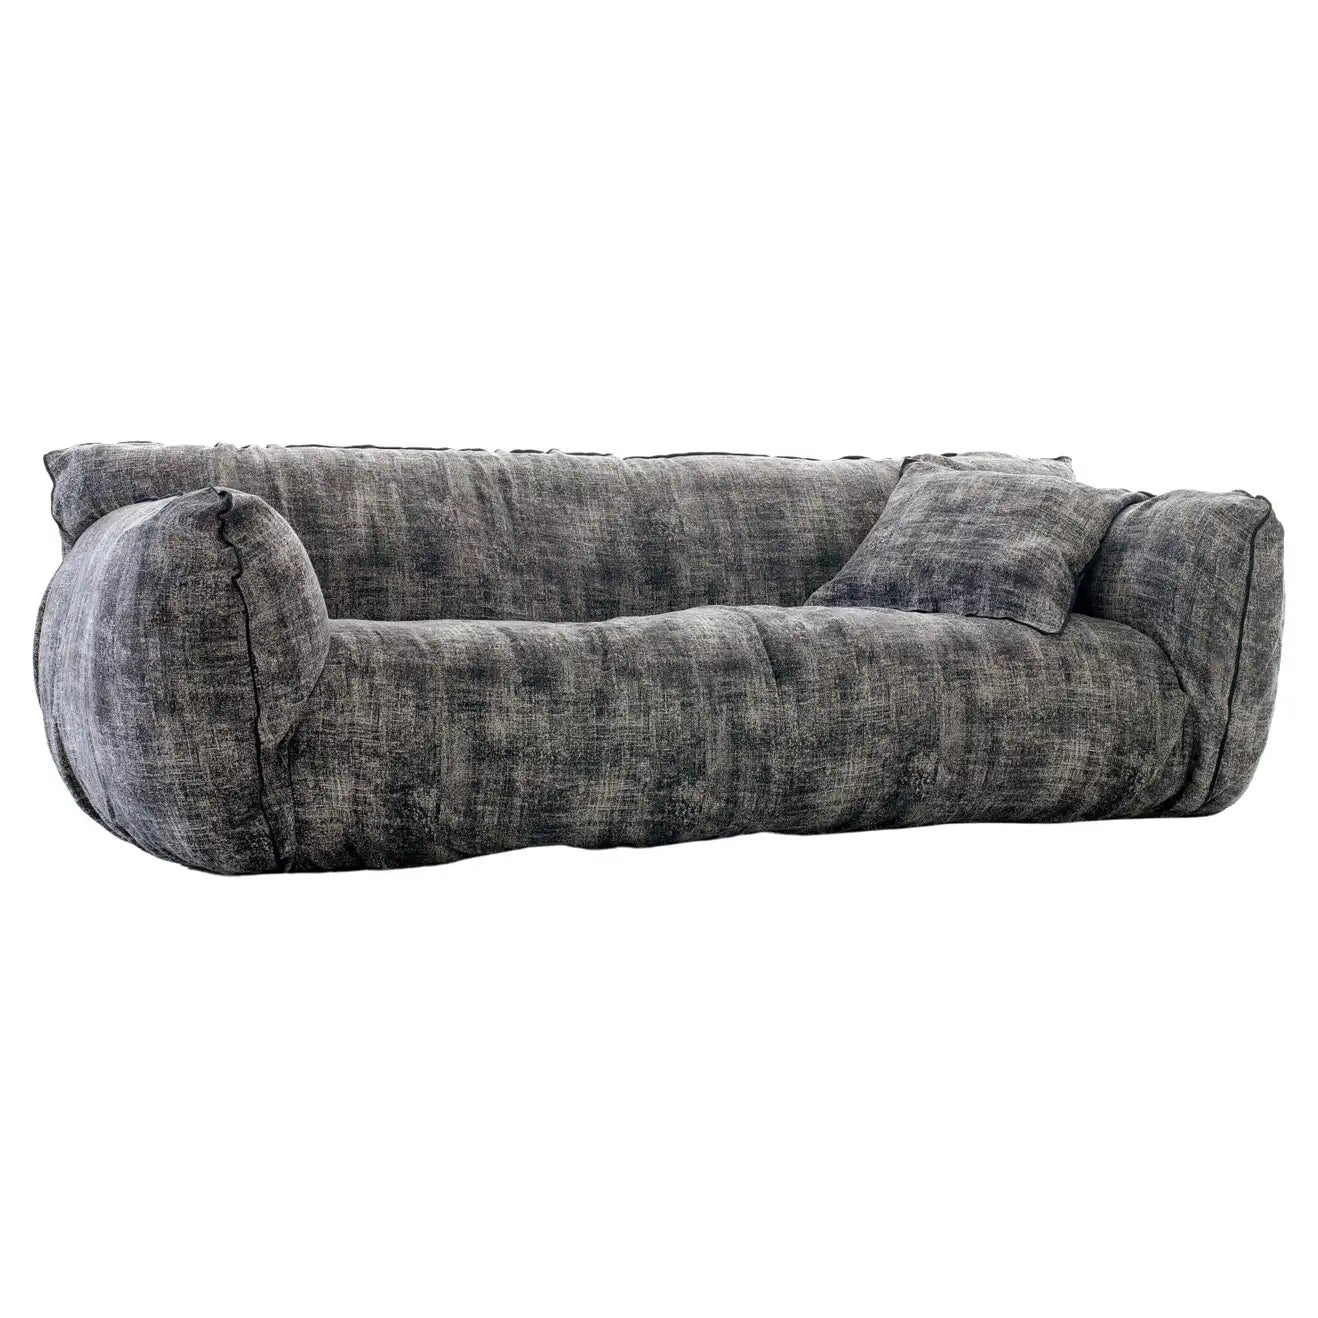 Gervasoni Nuvola 10 Sofa in Straight Seal Upholstery by Paola Navone $7,900.00